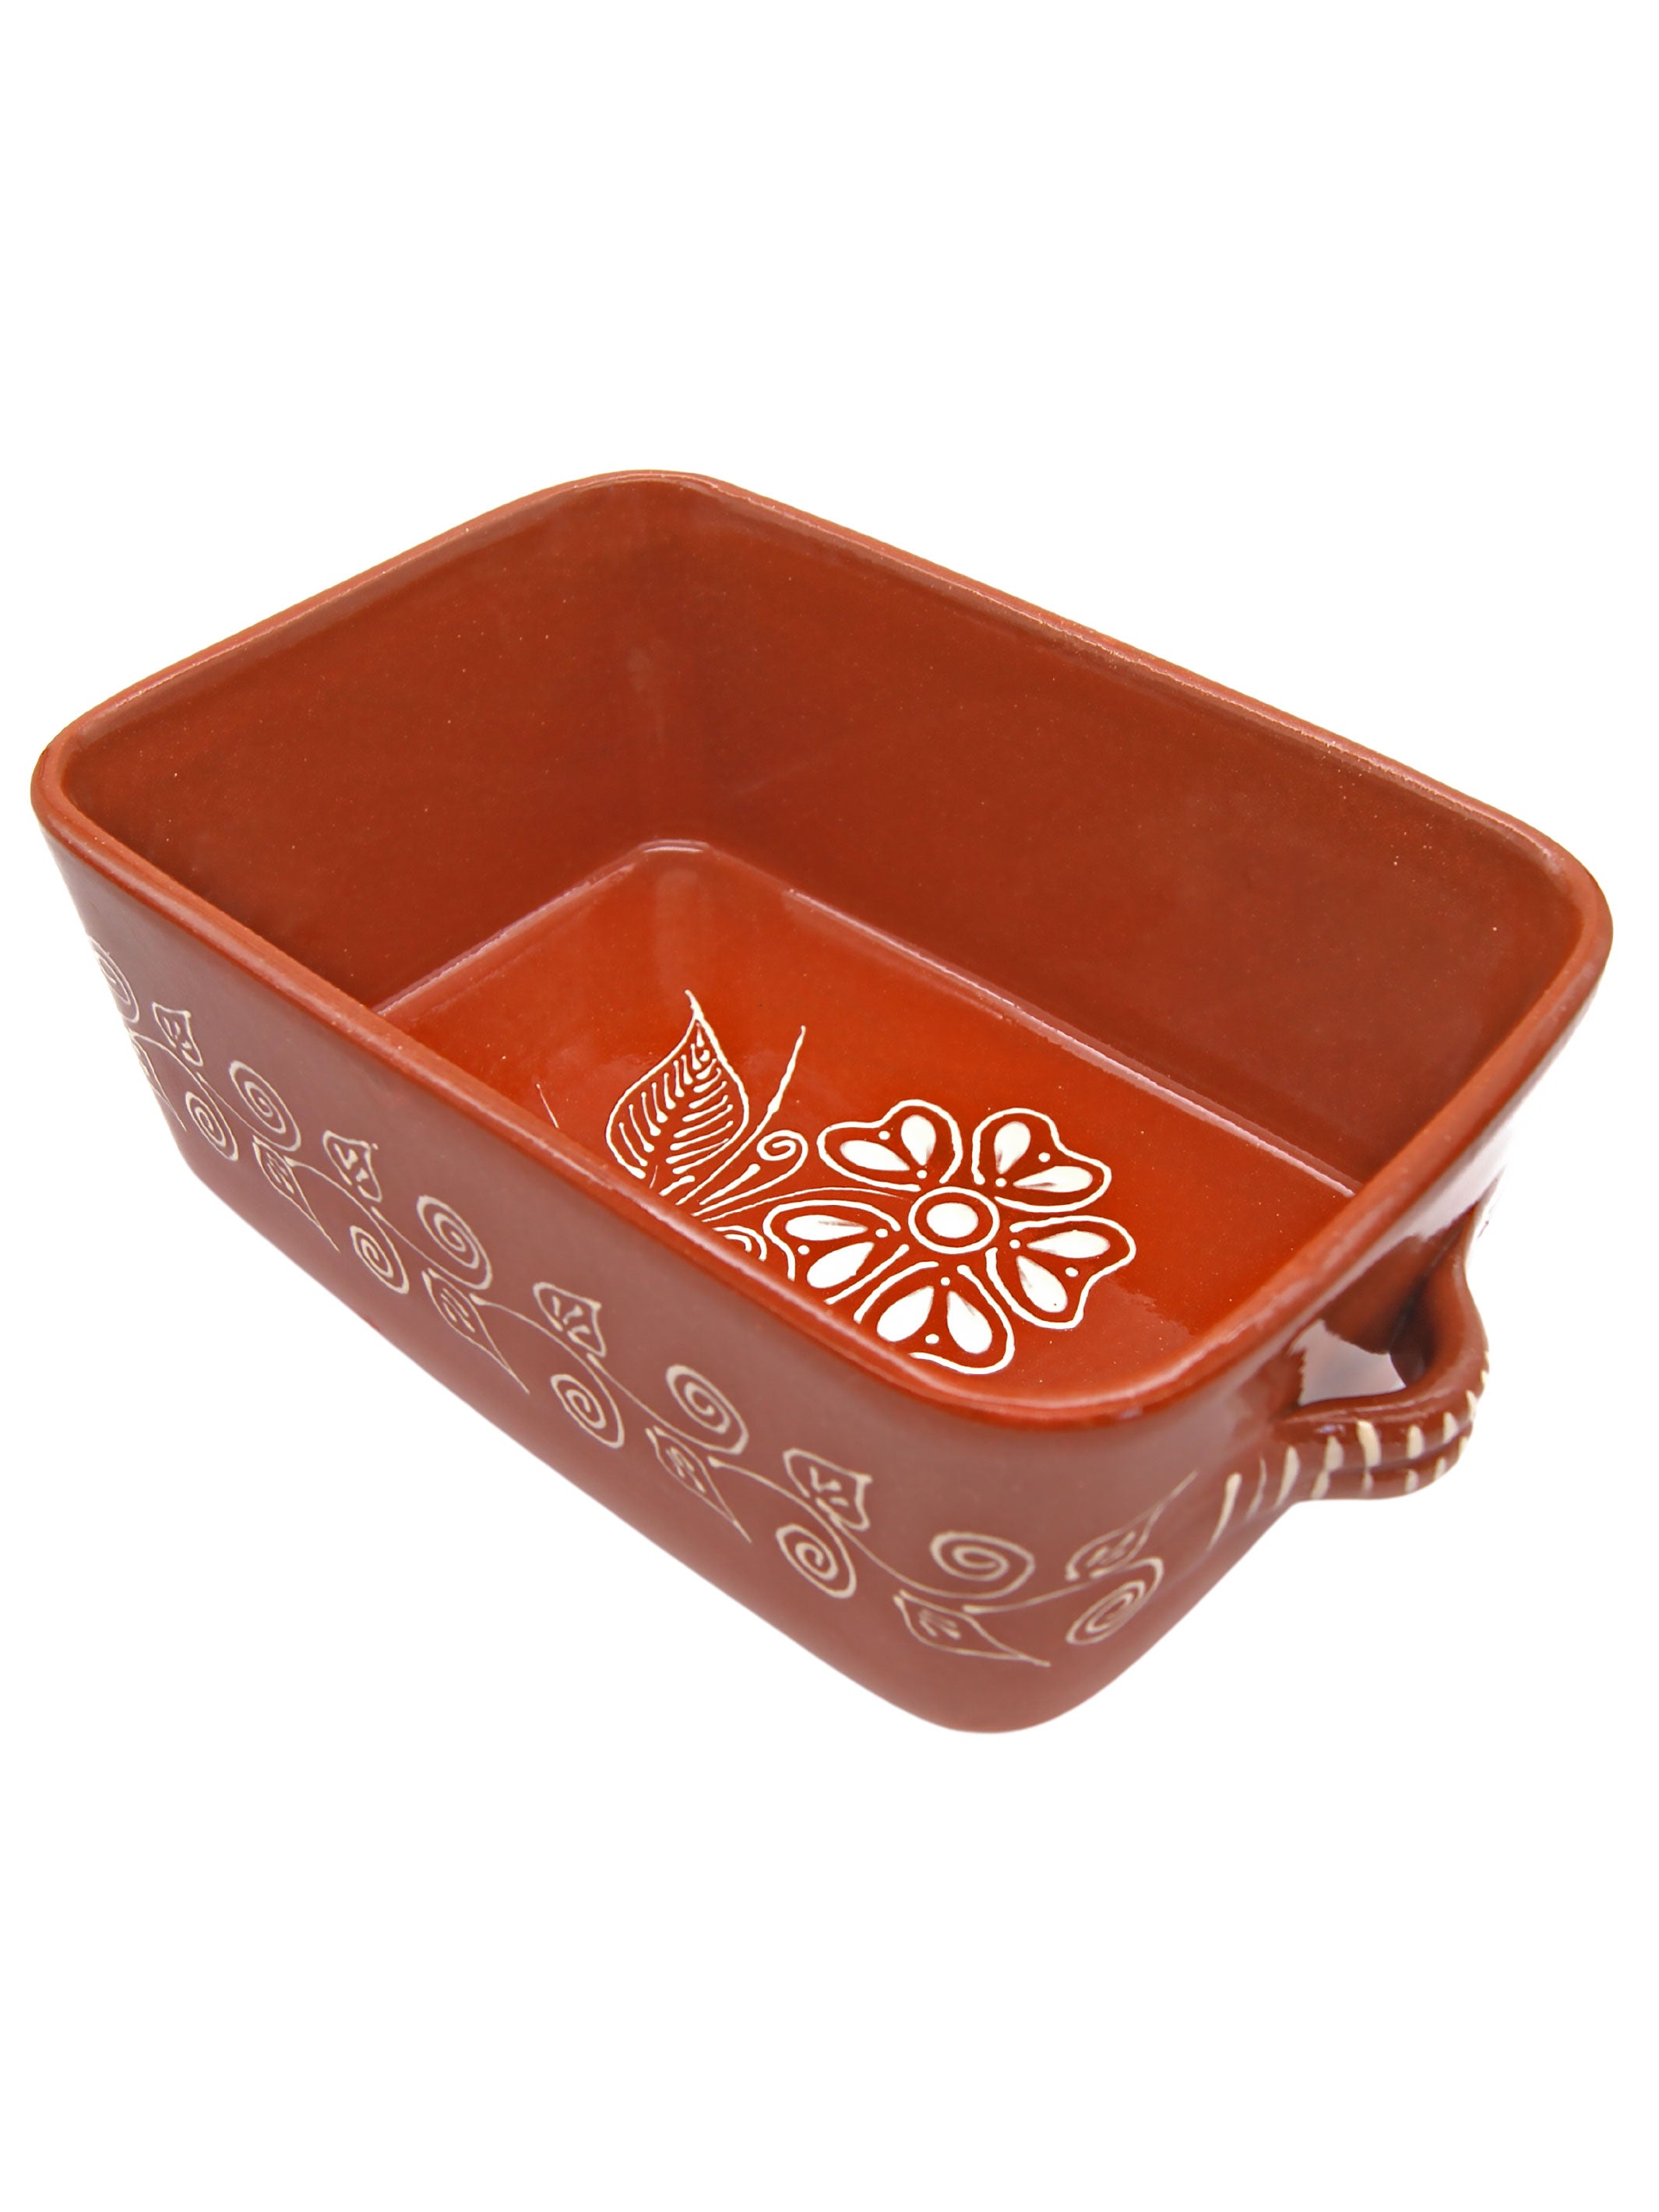 Portuguese Pottery Glazed Terracotta Clay Baking Pan for Oven